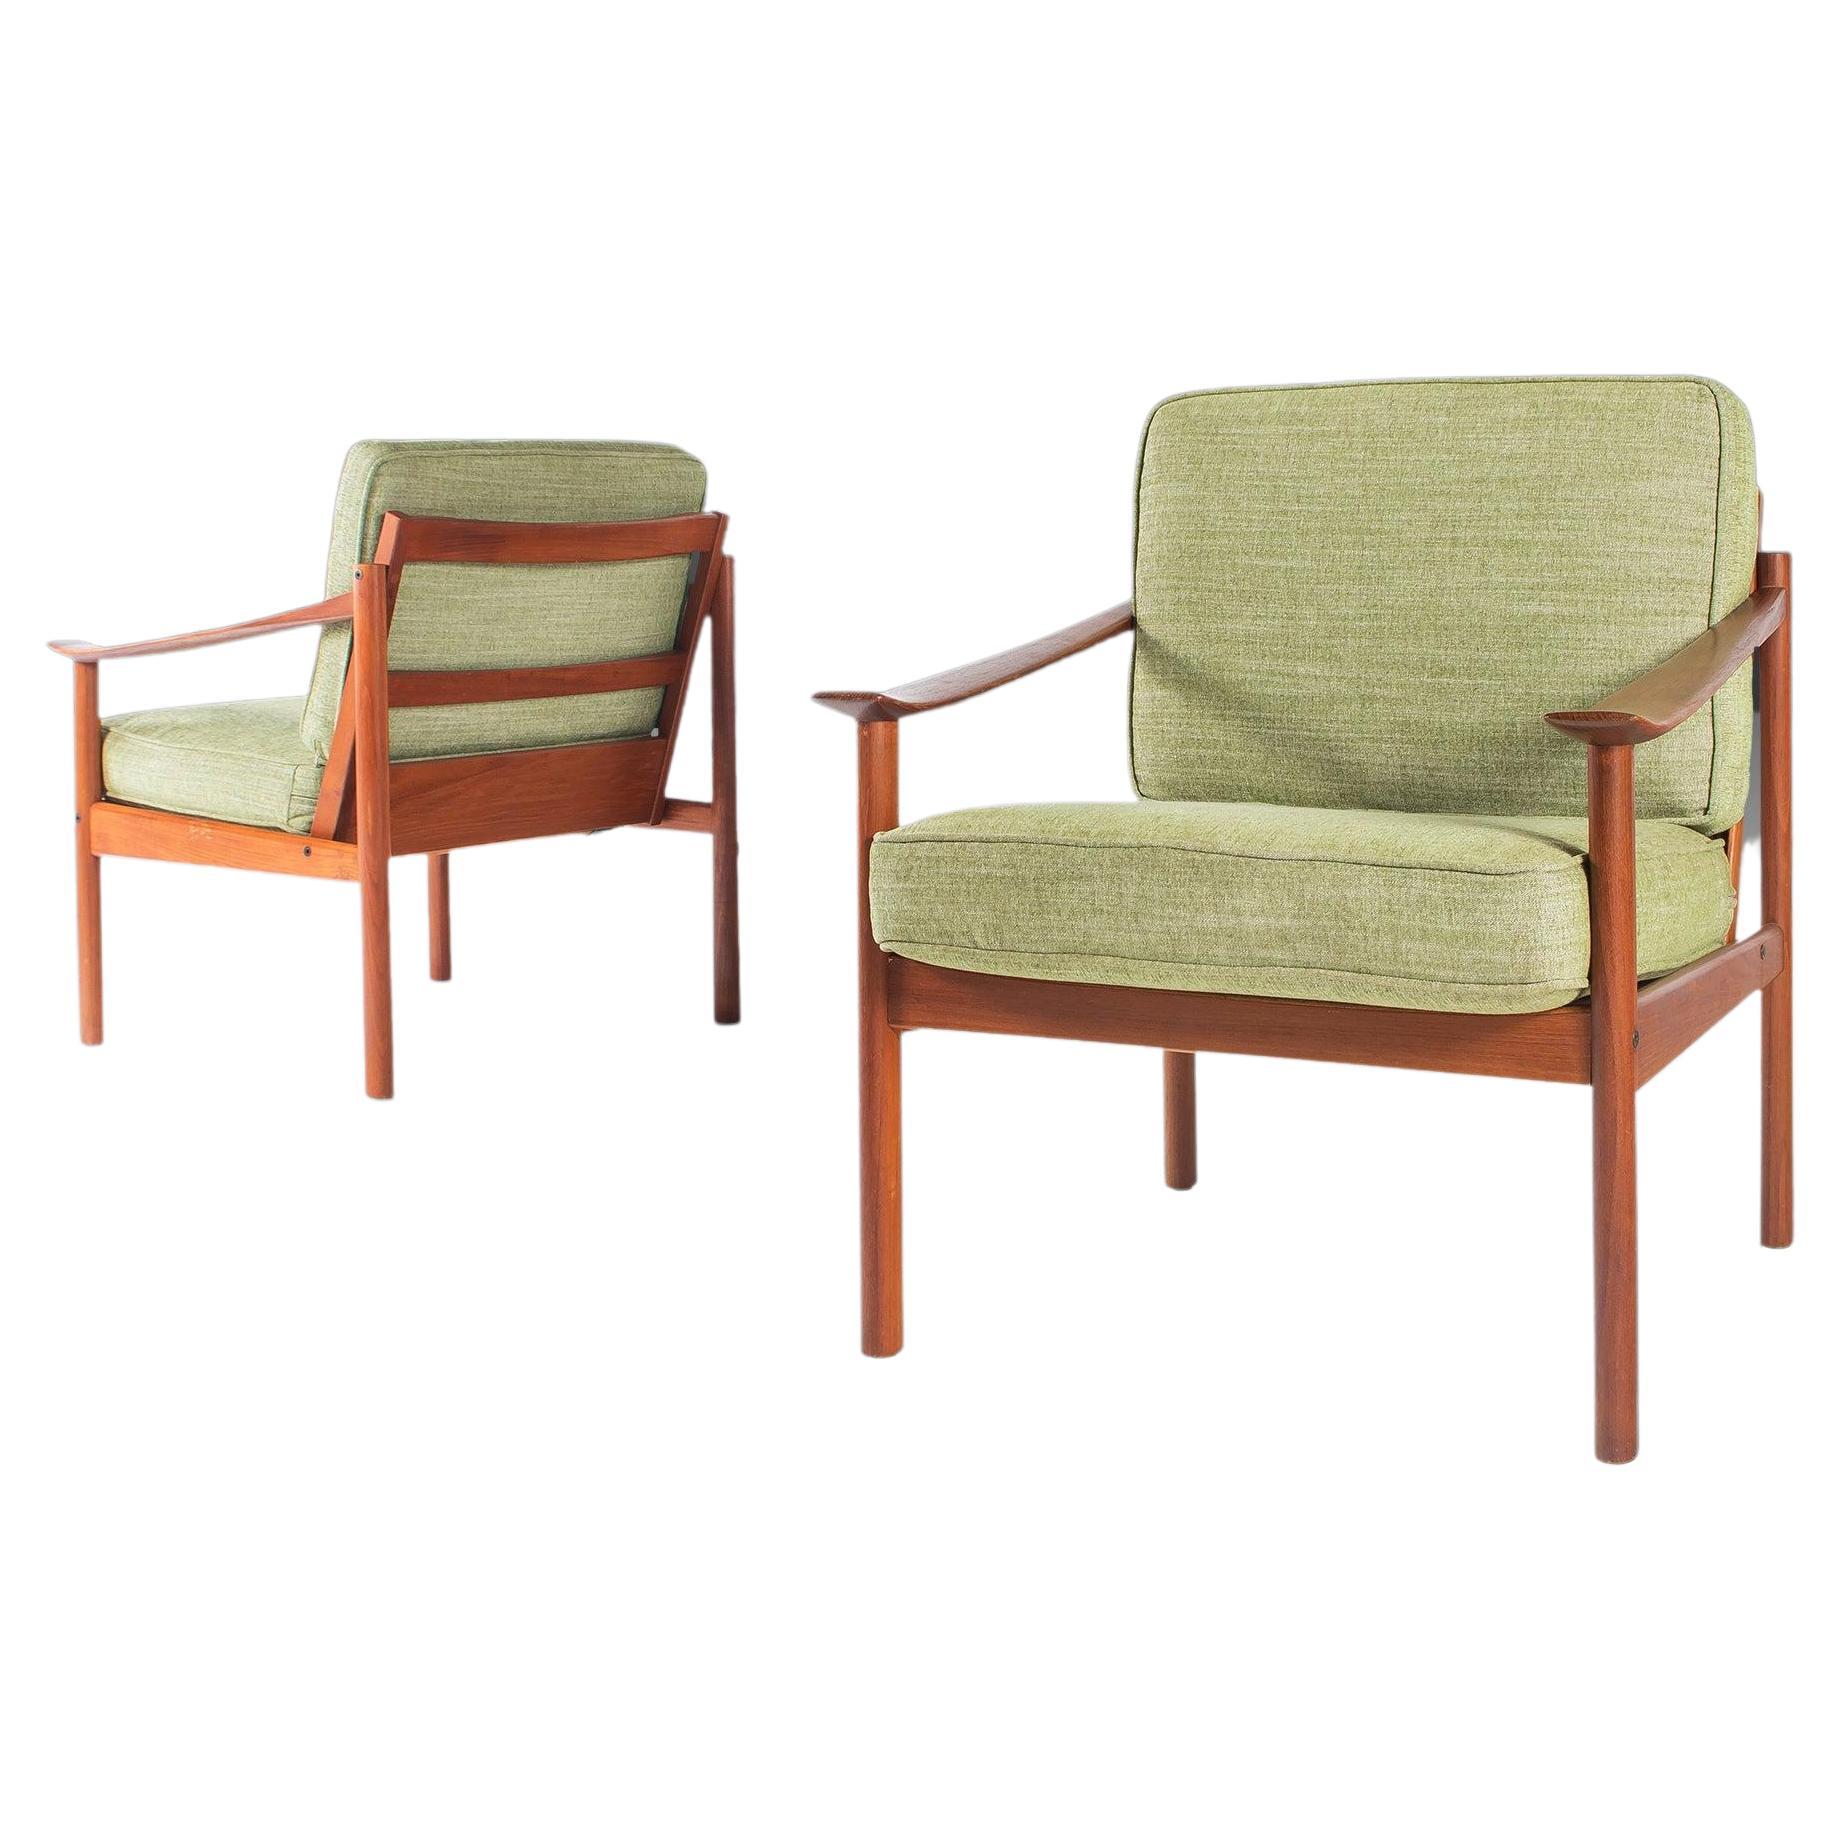 Set of Two '2' Lounge Chairs by Peter Hvidt for Soborg Møbler, Denmark, c. 1960s